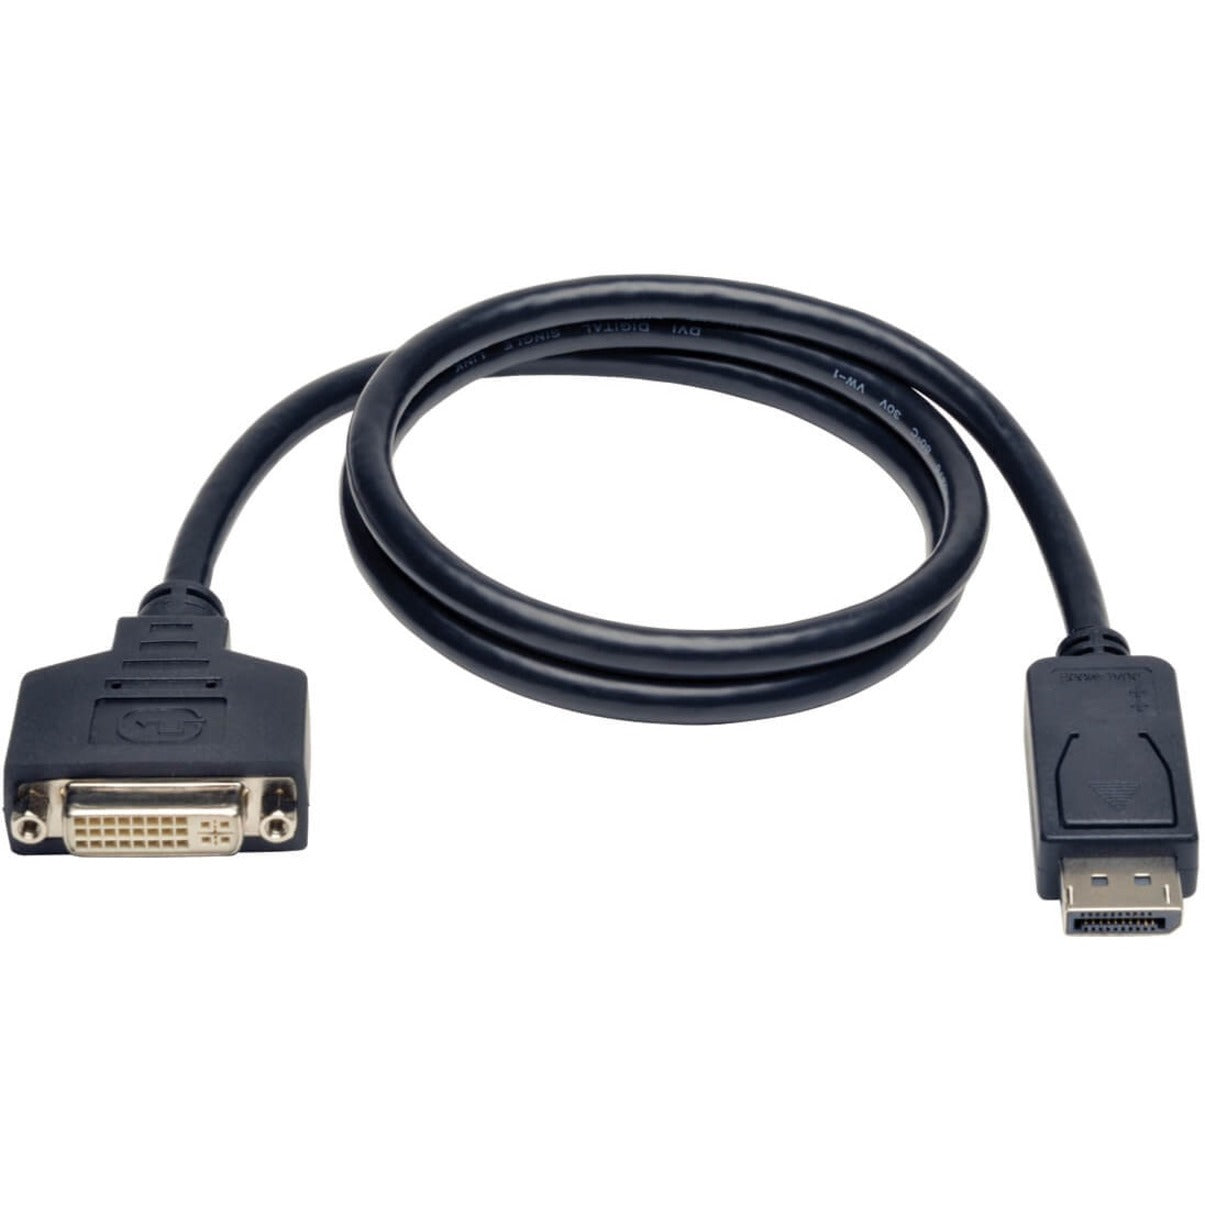 Tripp Lite P134-003 DisplayPort to DVI Cable Adapter, Converter for DP-M to DVI-I-F, 3-ft, Video Cable